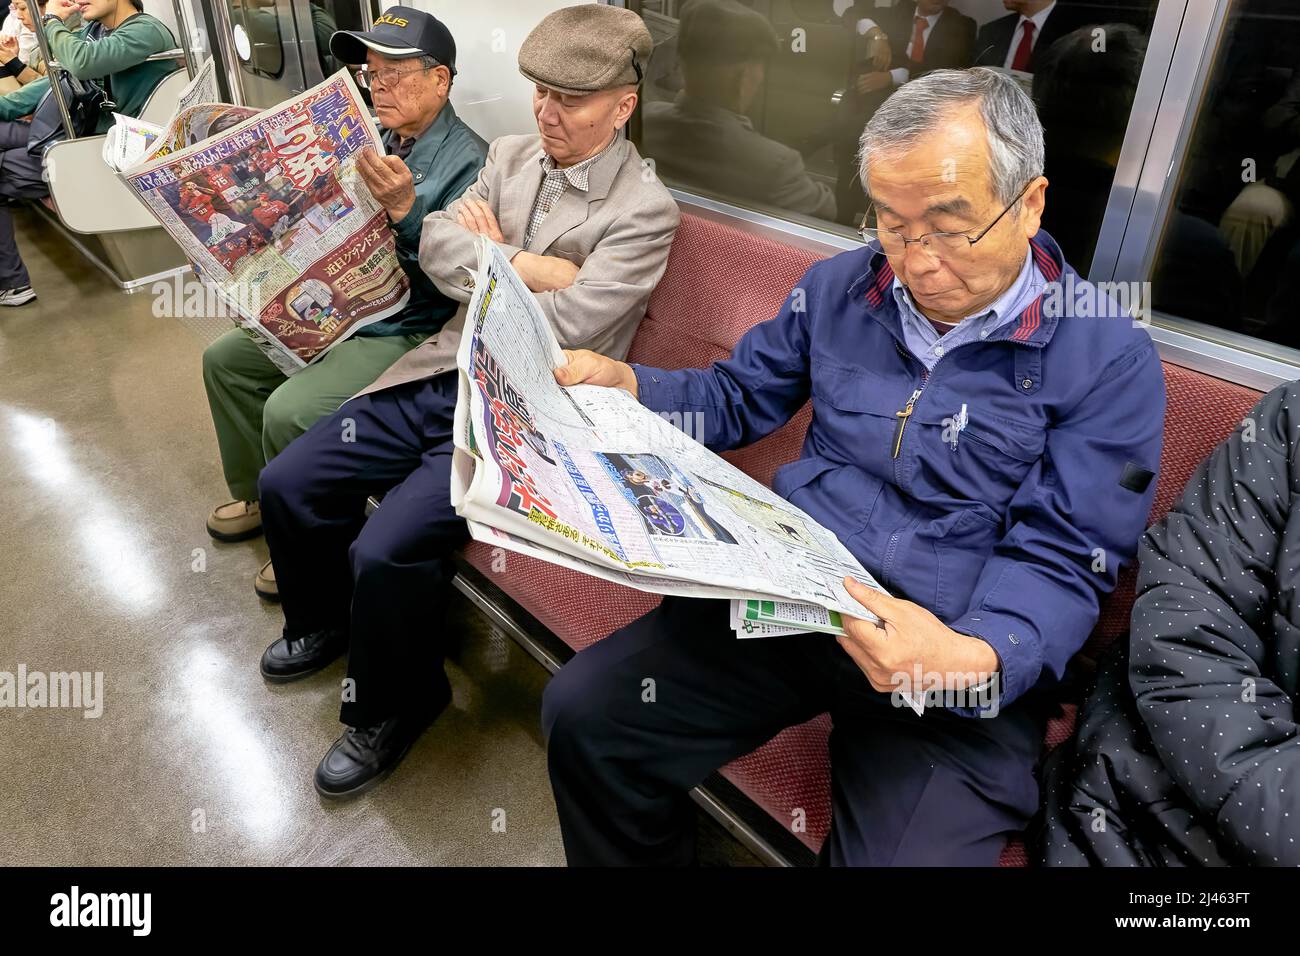 Japan. Tokyo. Passengers on the subway, reading the newspaper Stock Photo